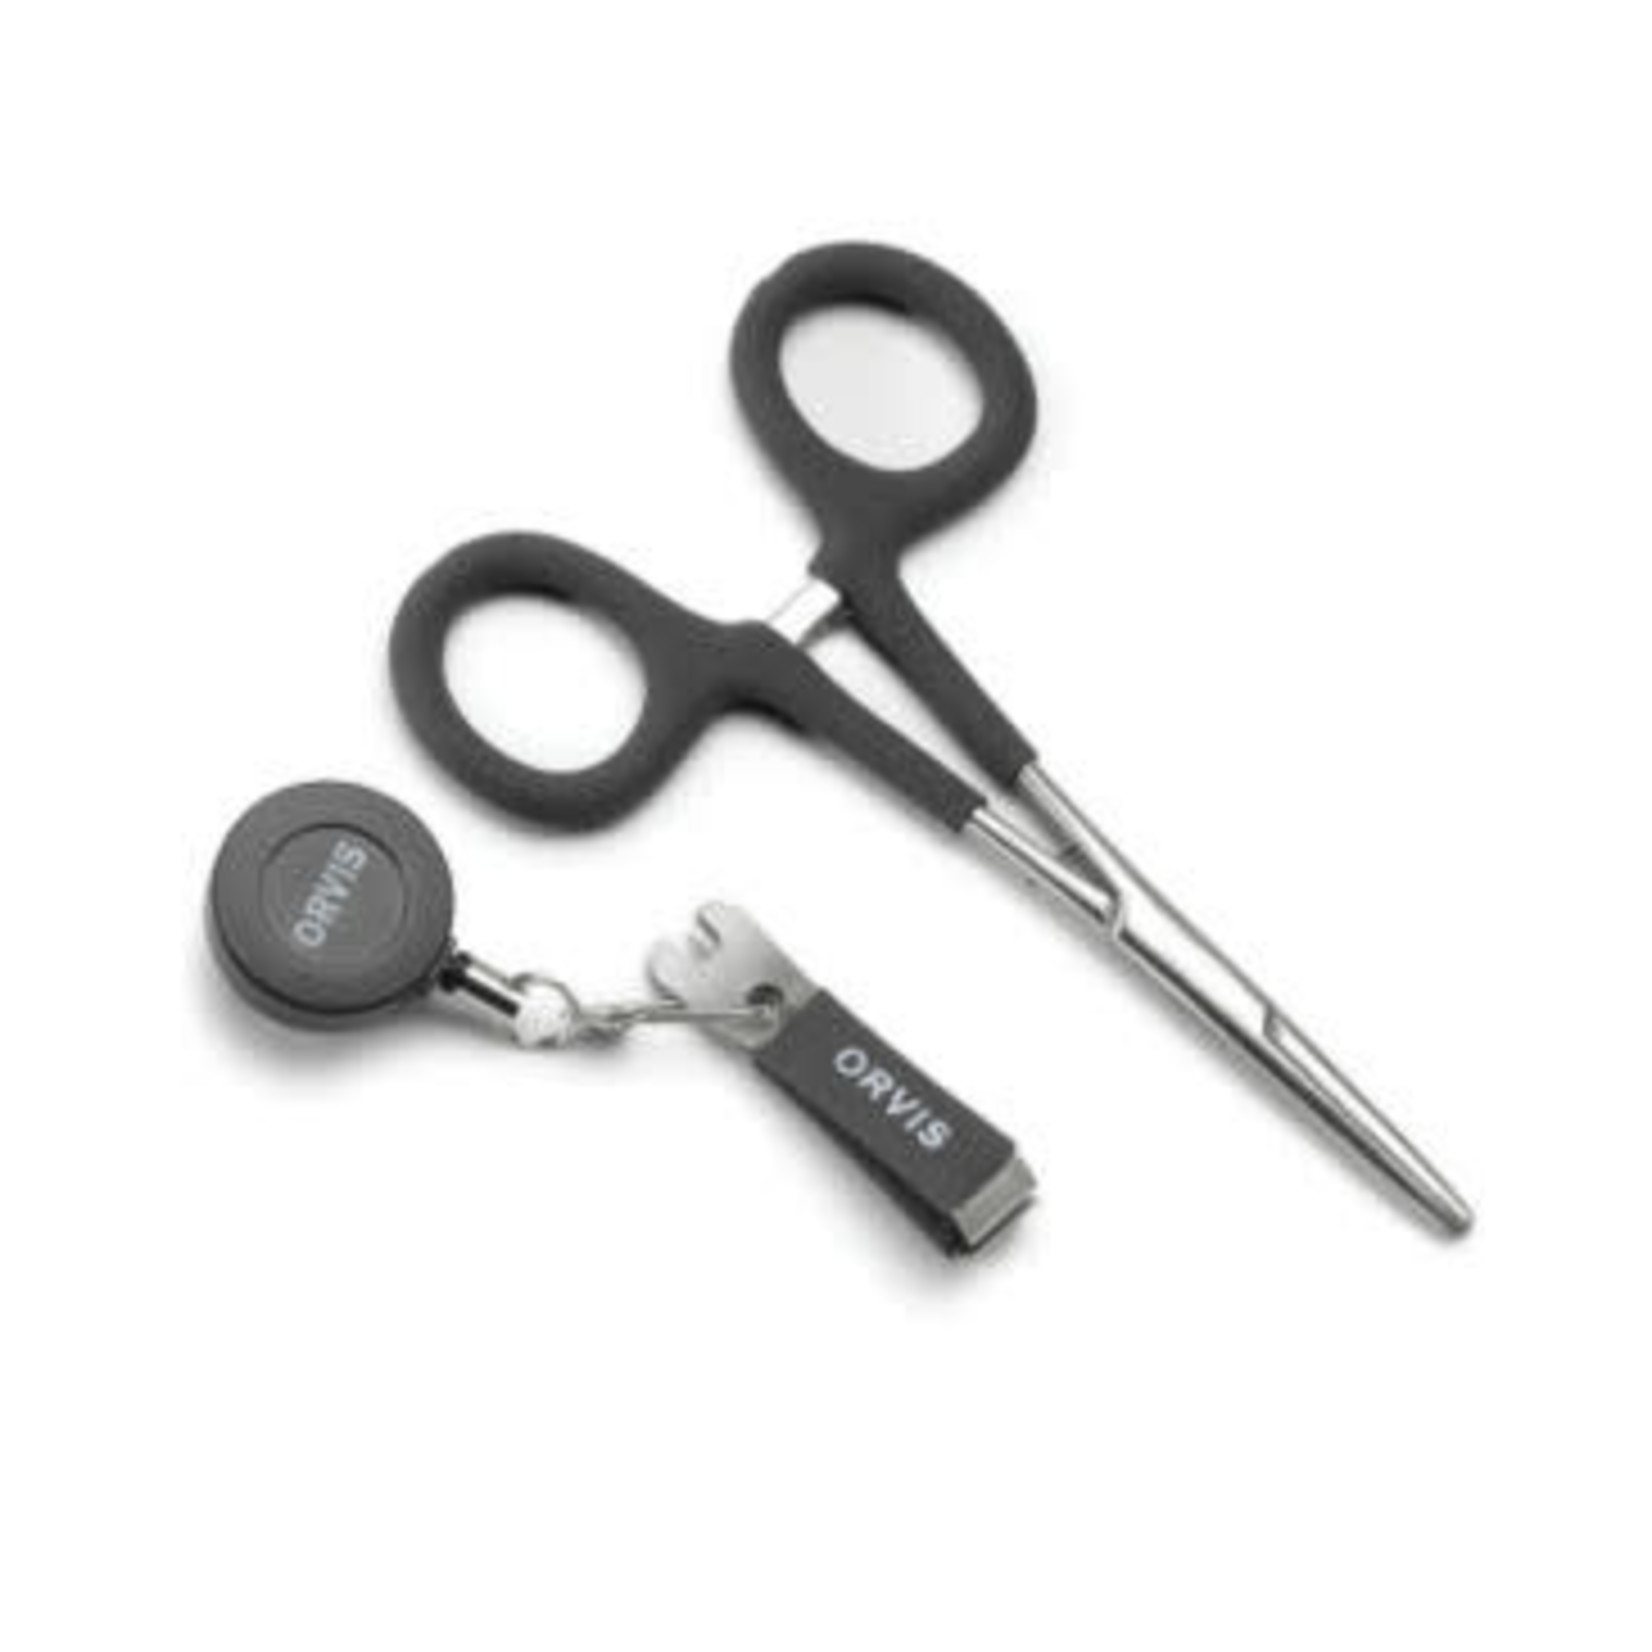 Orvis Essentials Kit Forceps Zinger Nippers - Black Dog Outdoor Sports